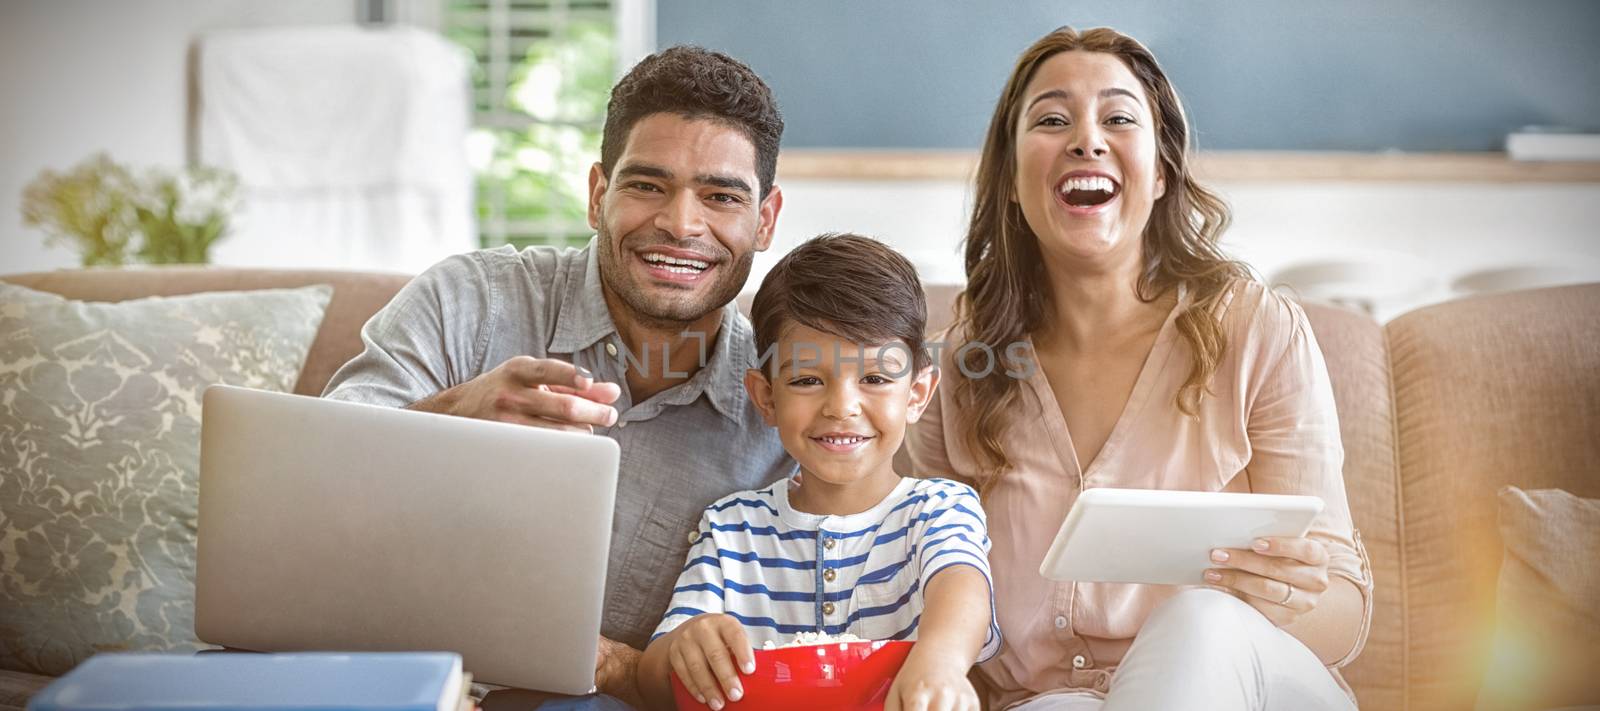 Son watching television while father and mother using laptop and digital tablet at home by Wavebreakmedia